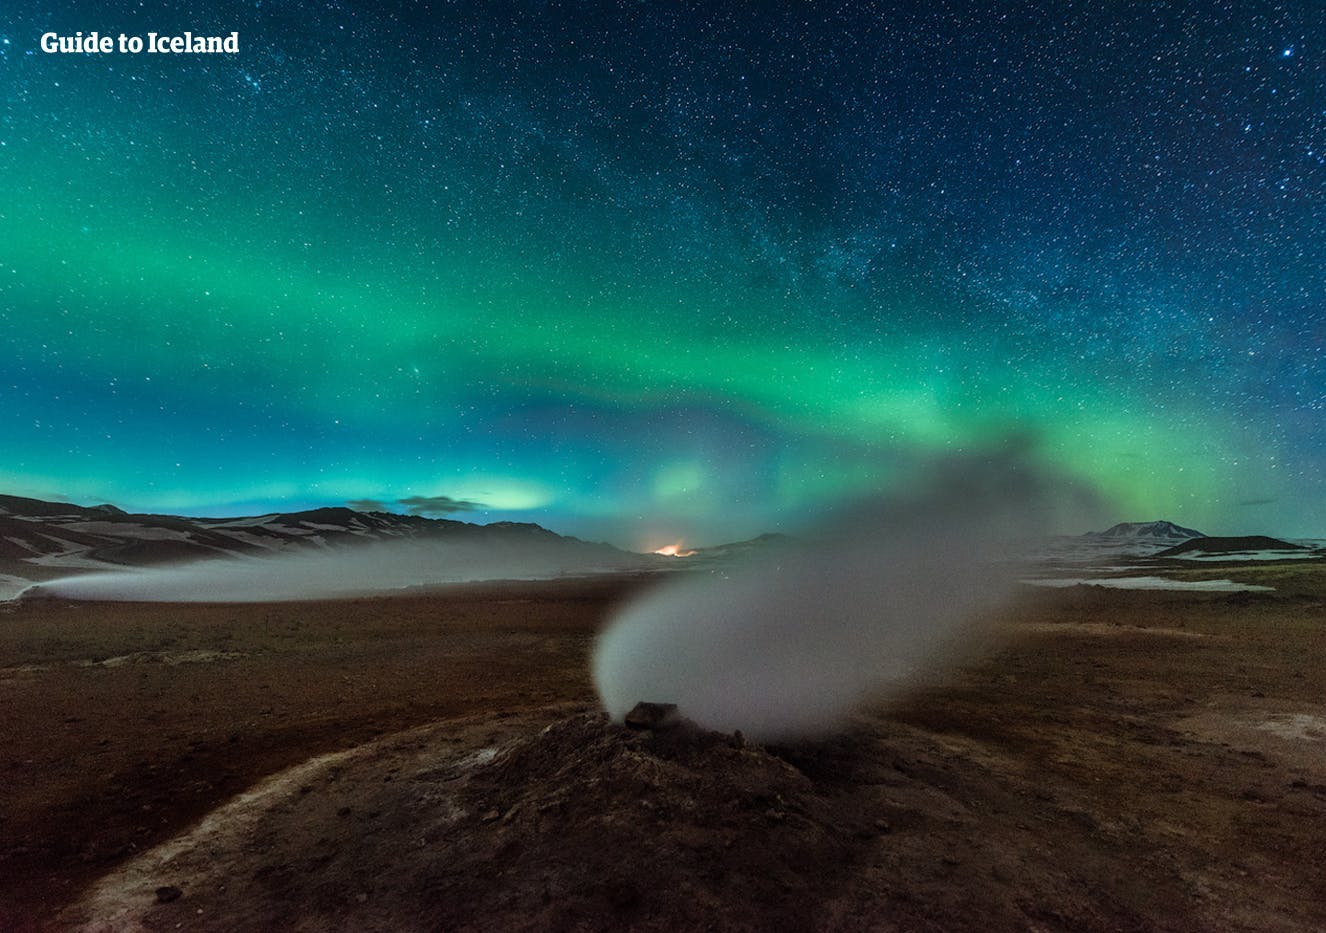 Námaskarð Pass is a geothermal area, pictured here in winter under the Northern Lights.